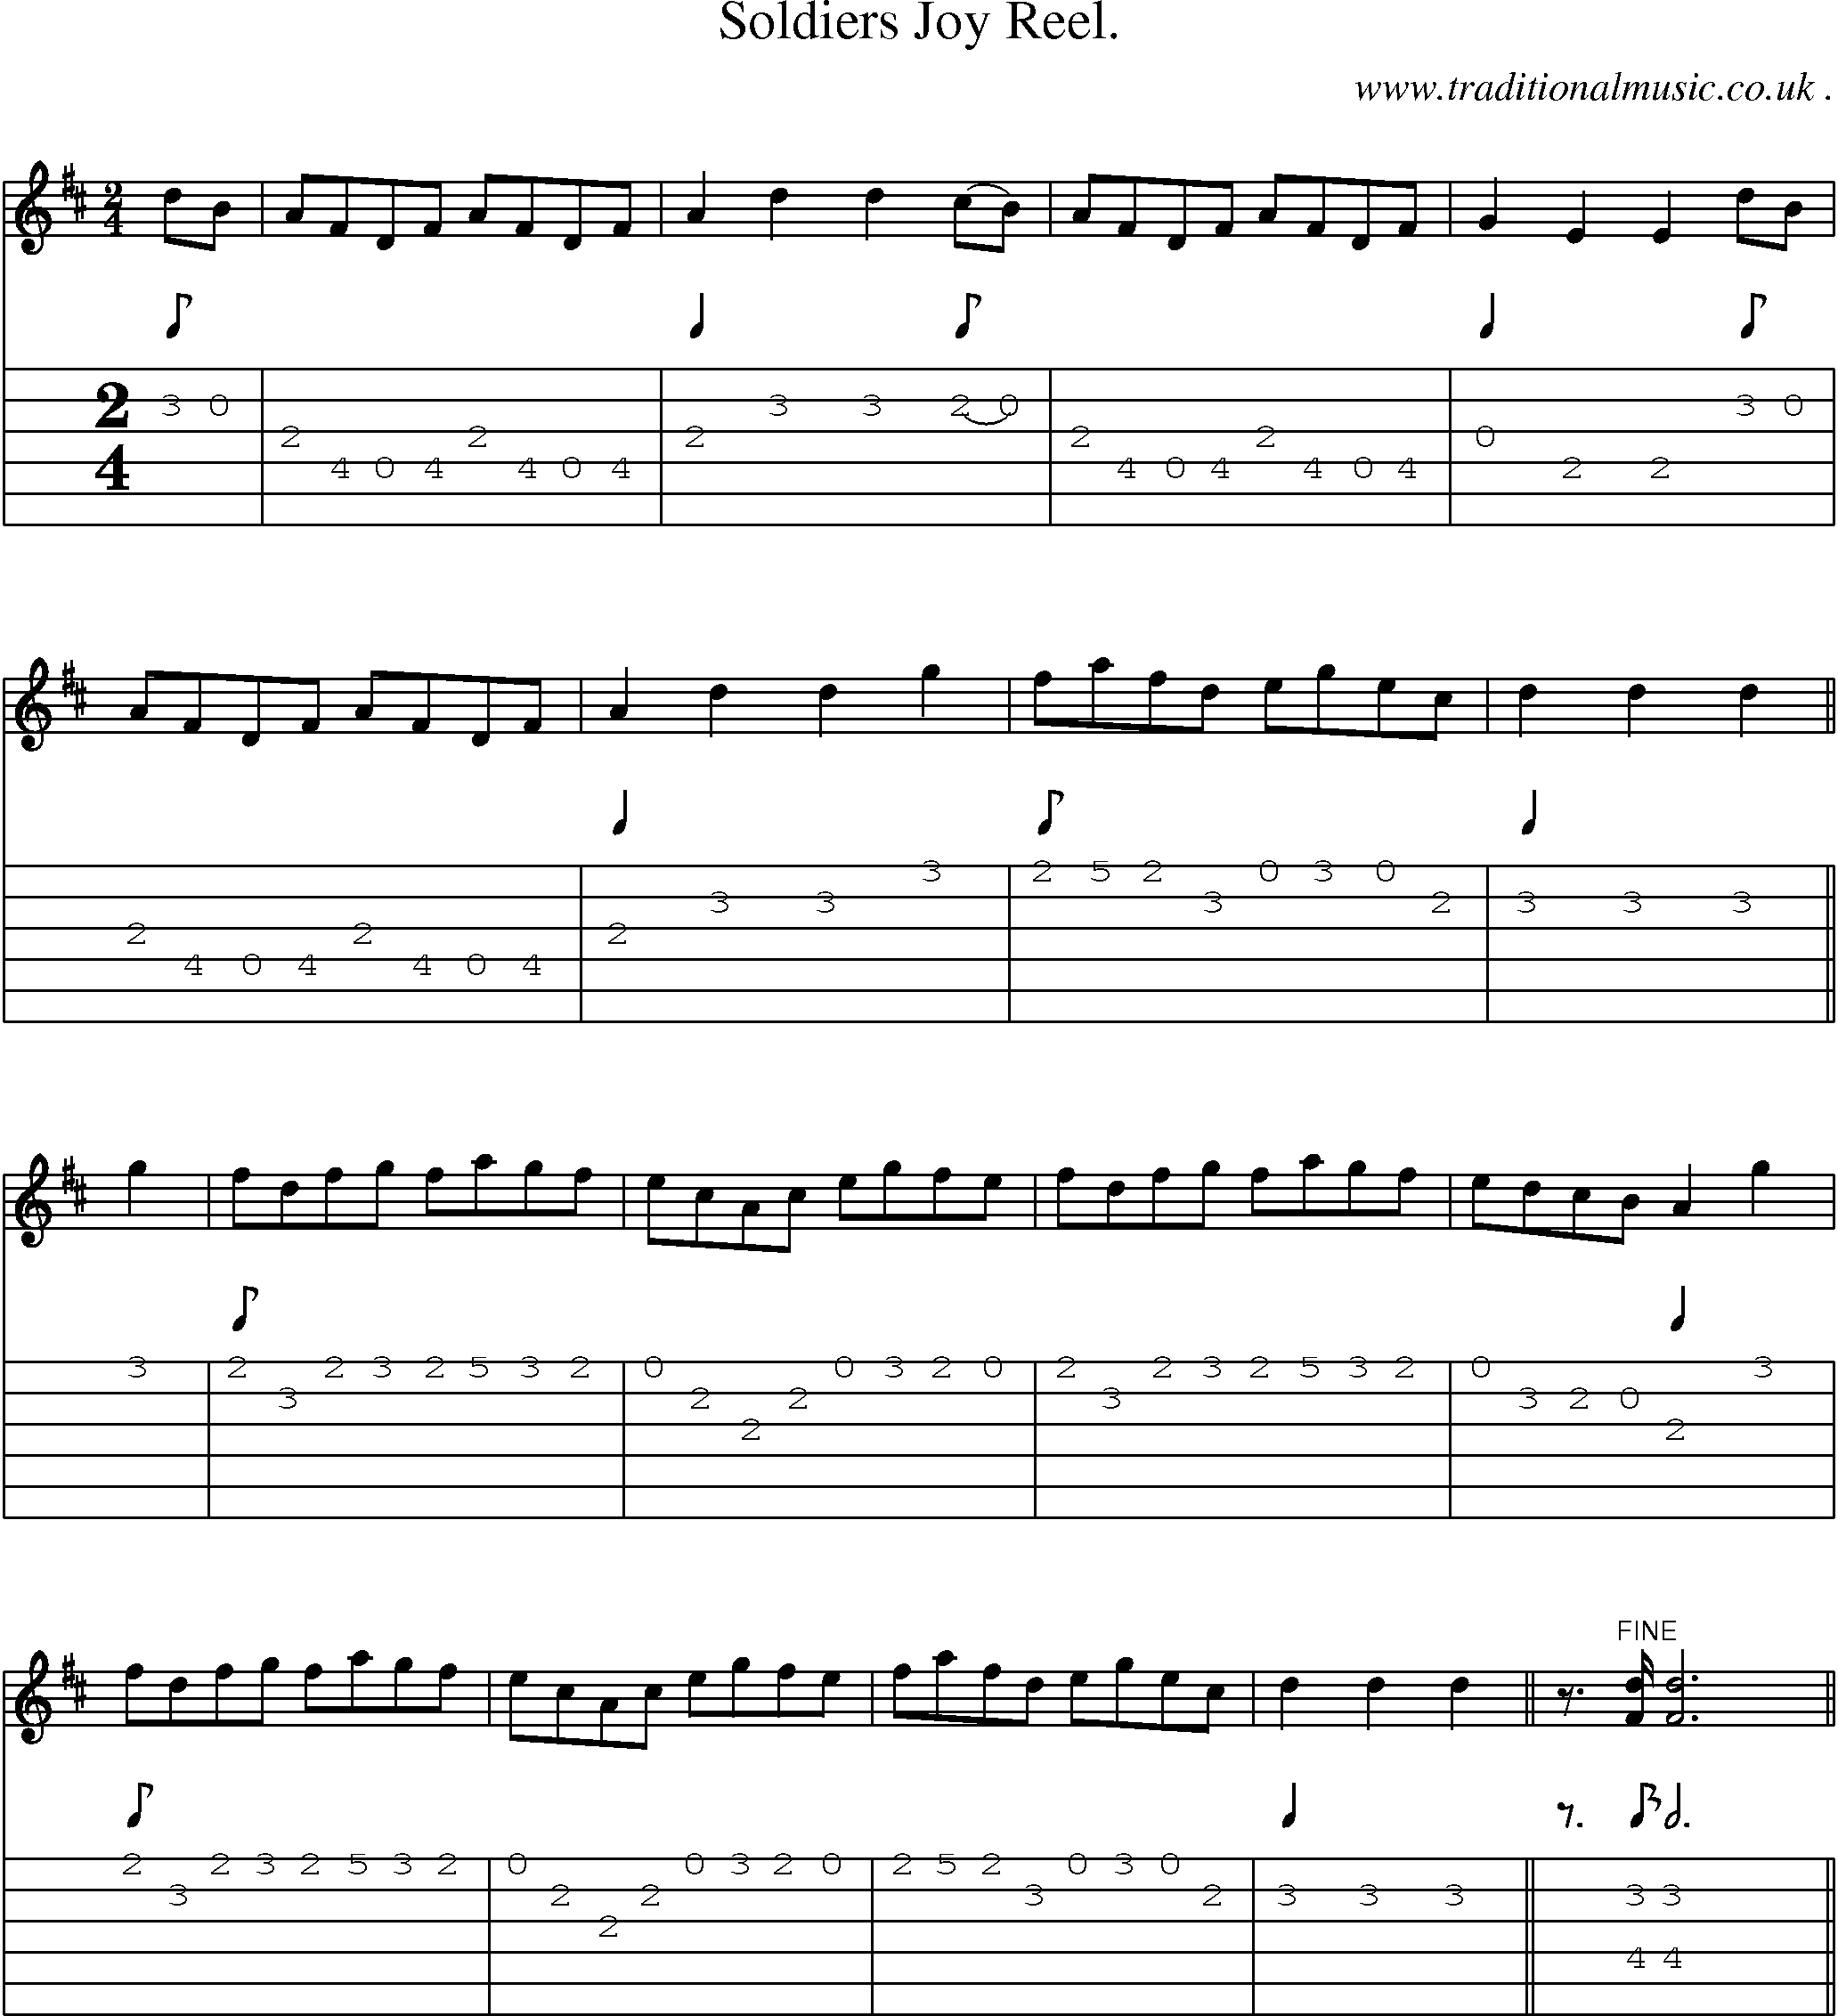 Sheet-Music and Guitar Tabs for Soldiers Joy Reel